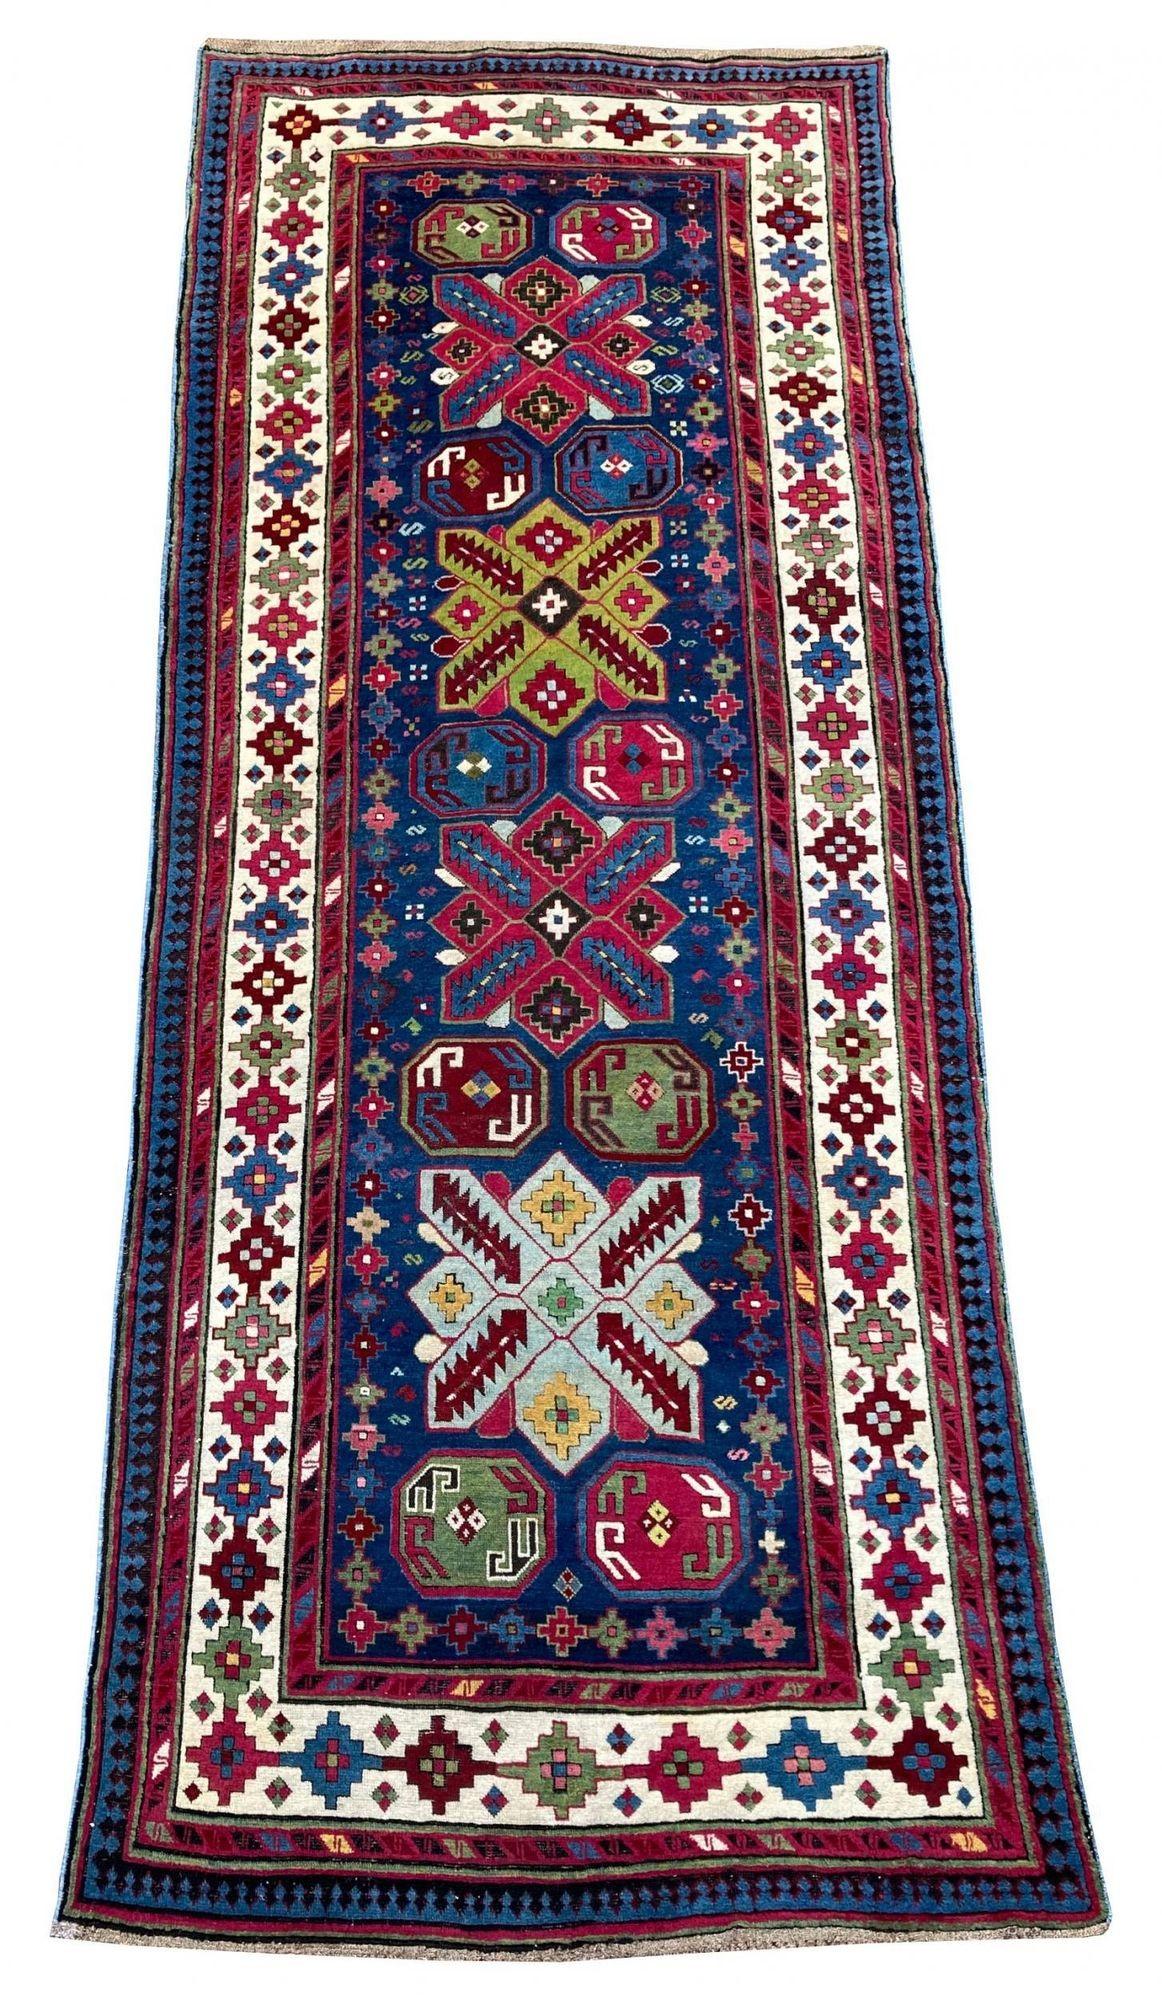 An exceptional Caucasian runner, hand woven in the Talish region of Azerbaijan circa 1900 with a geometrical design on an indigo field and ivory border. A highly collectible rug with fabulous wool quality and stunning secondary colours.
Size: 2.97m